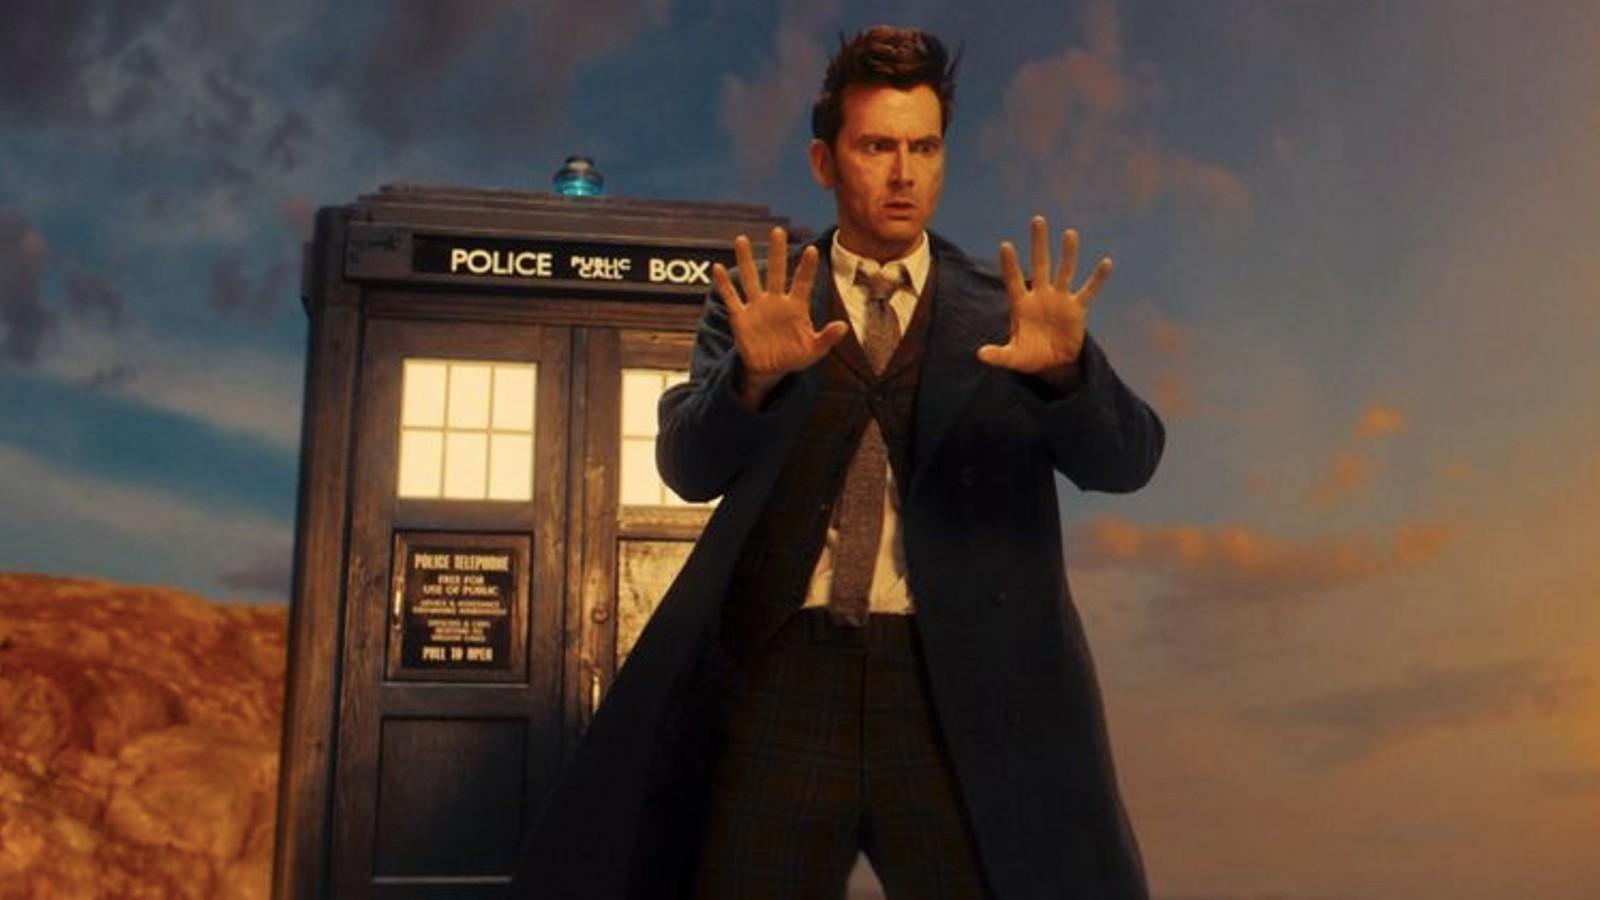 An image of David Tennant as the Fourteenth Doctor in Doctor Who.